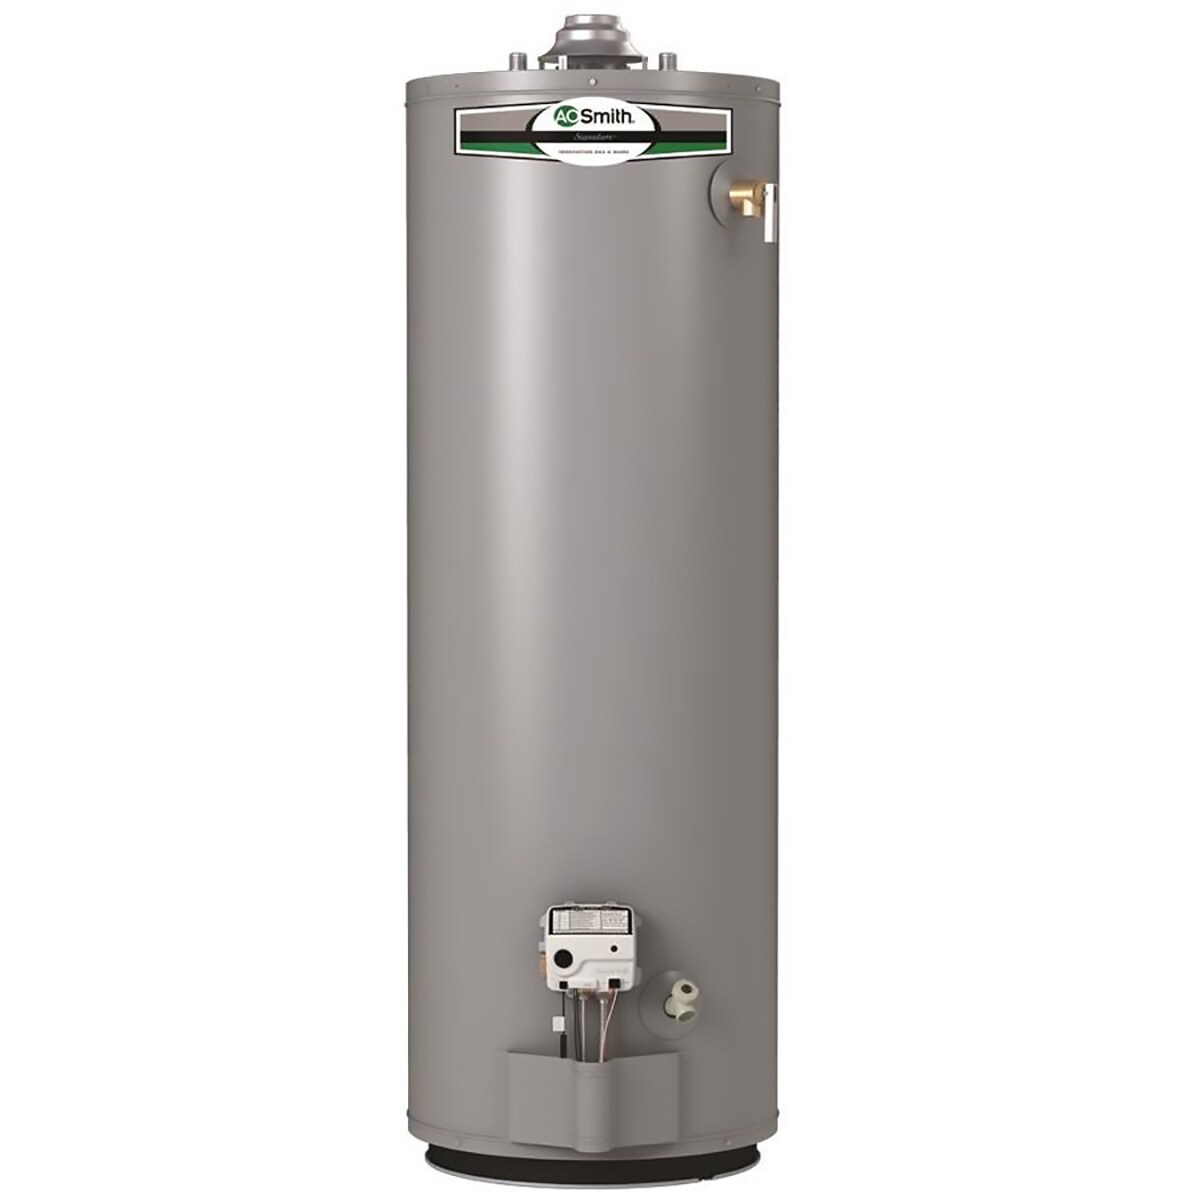 natural-gas-gas-water-heaters-at-lowes